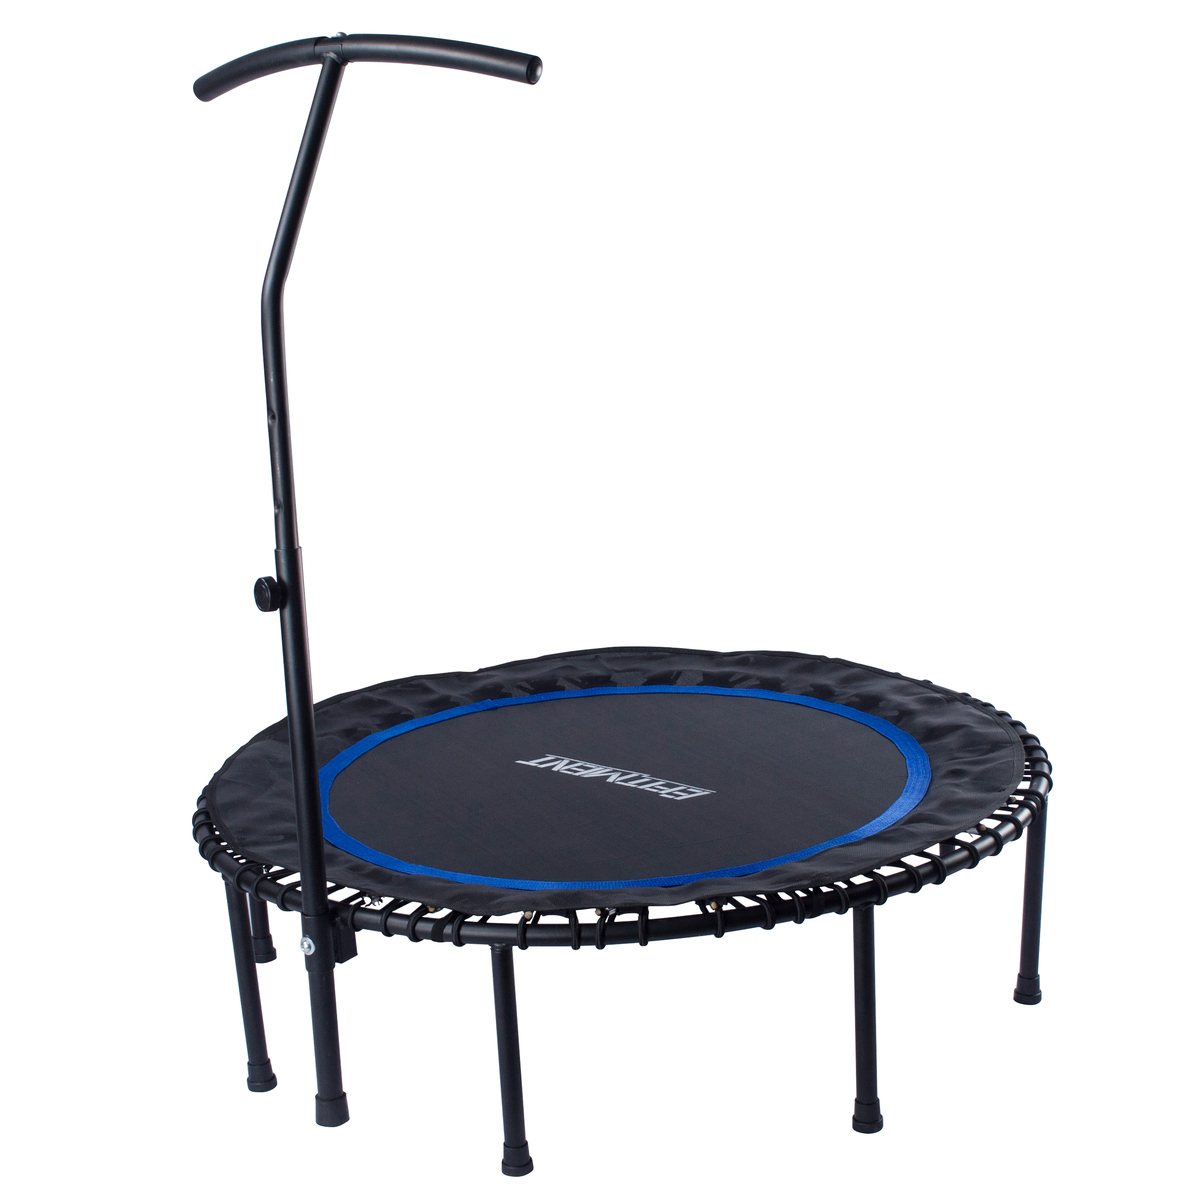 What Is A Rebounding Trampoline